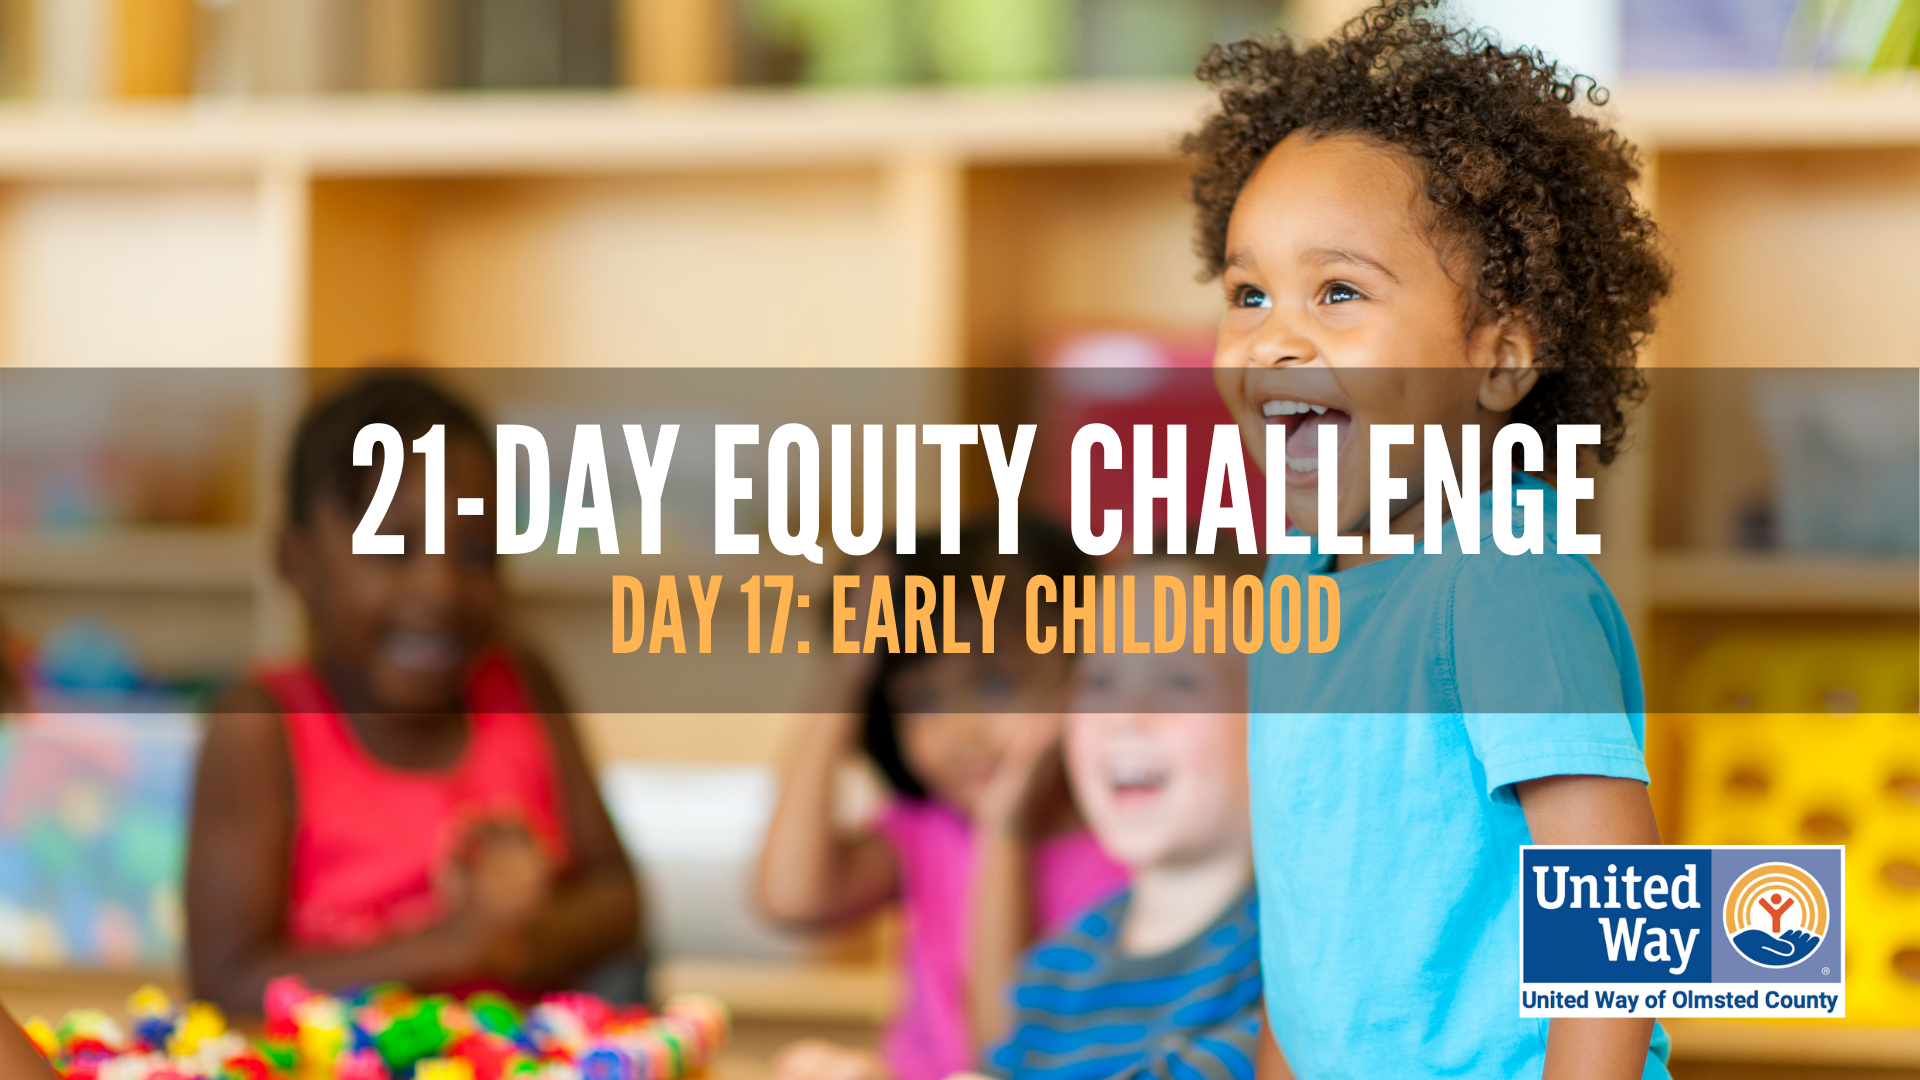 Day 17: Early Childhood